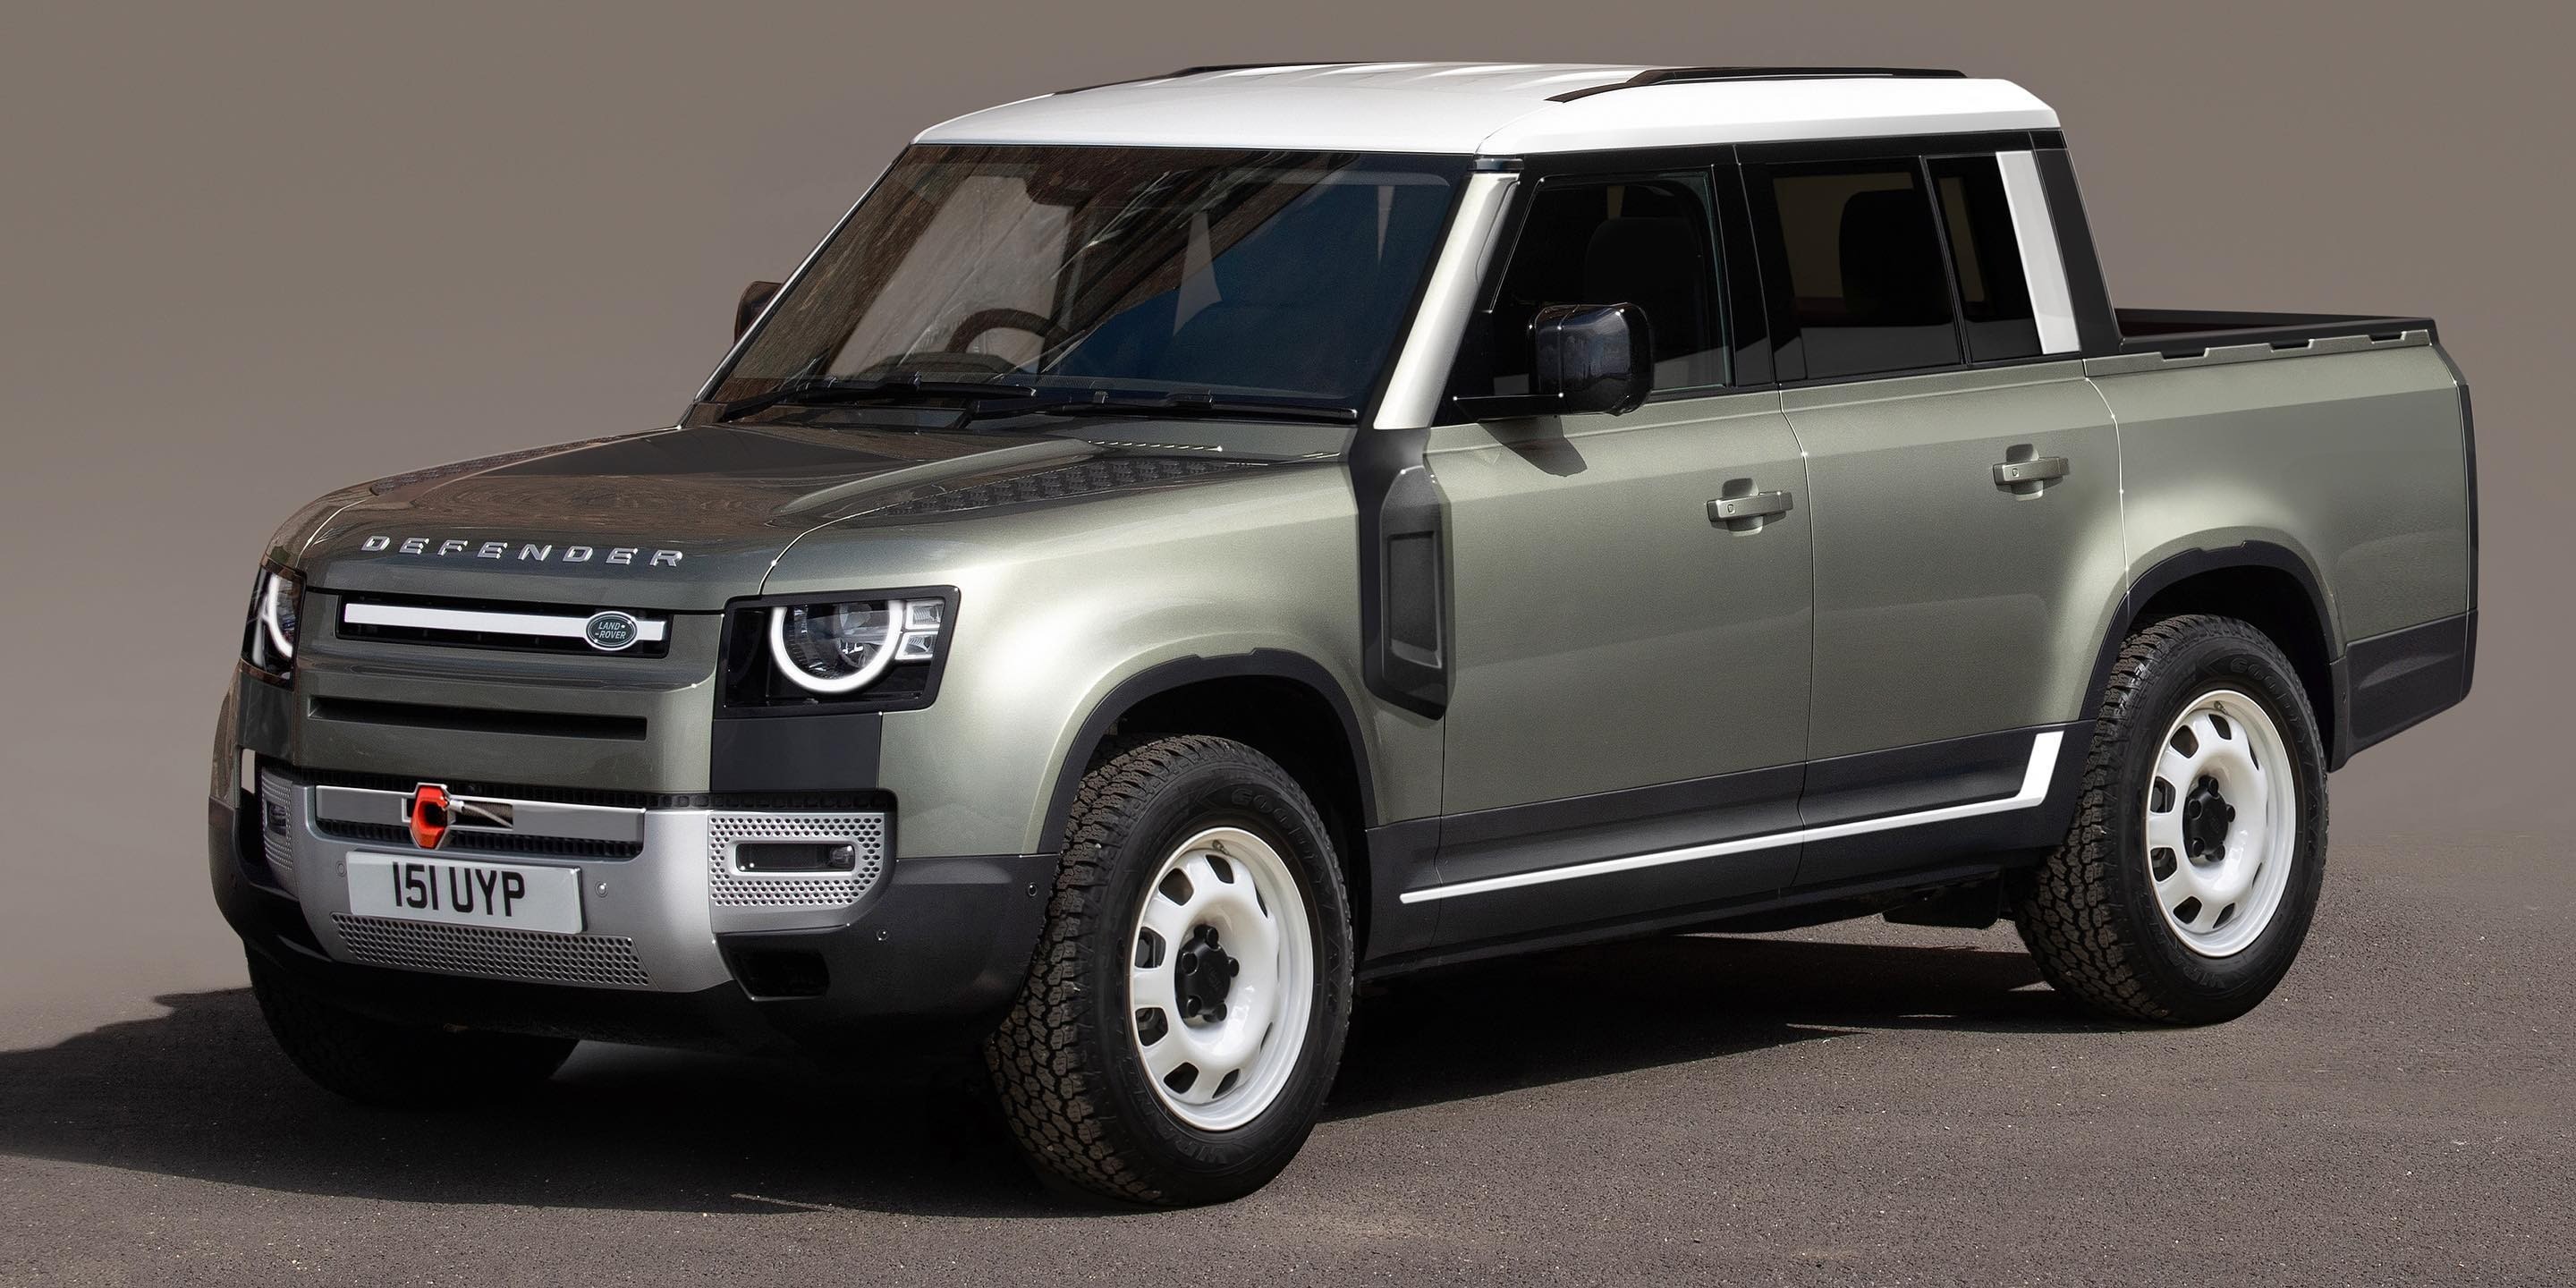 Land Rover Defender 130 Morphs Into the Right Kind of Pickup Truck, a